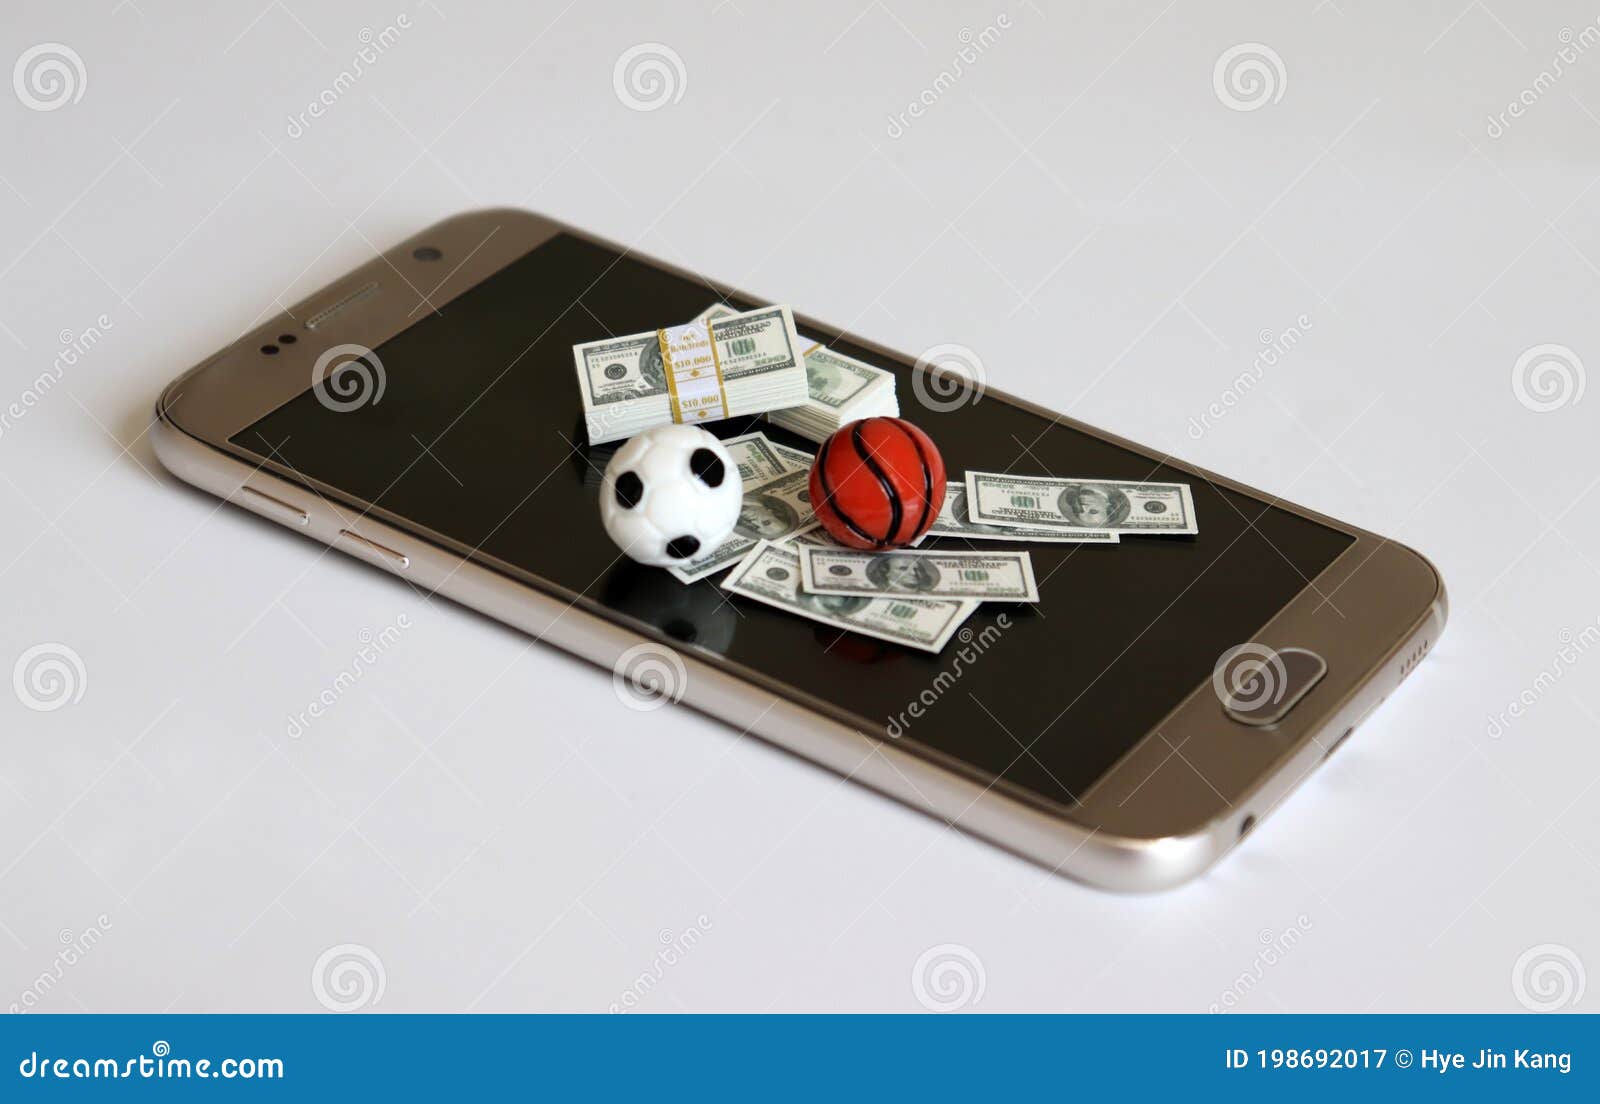  about online sports betting. the sports balls and money on the smartphone screen.